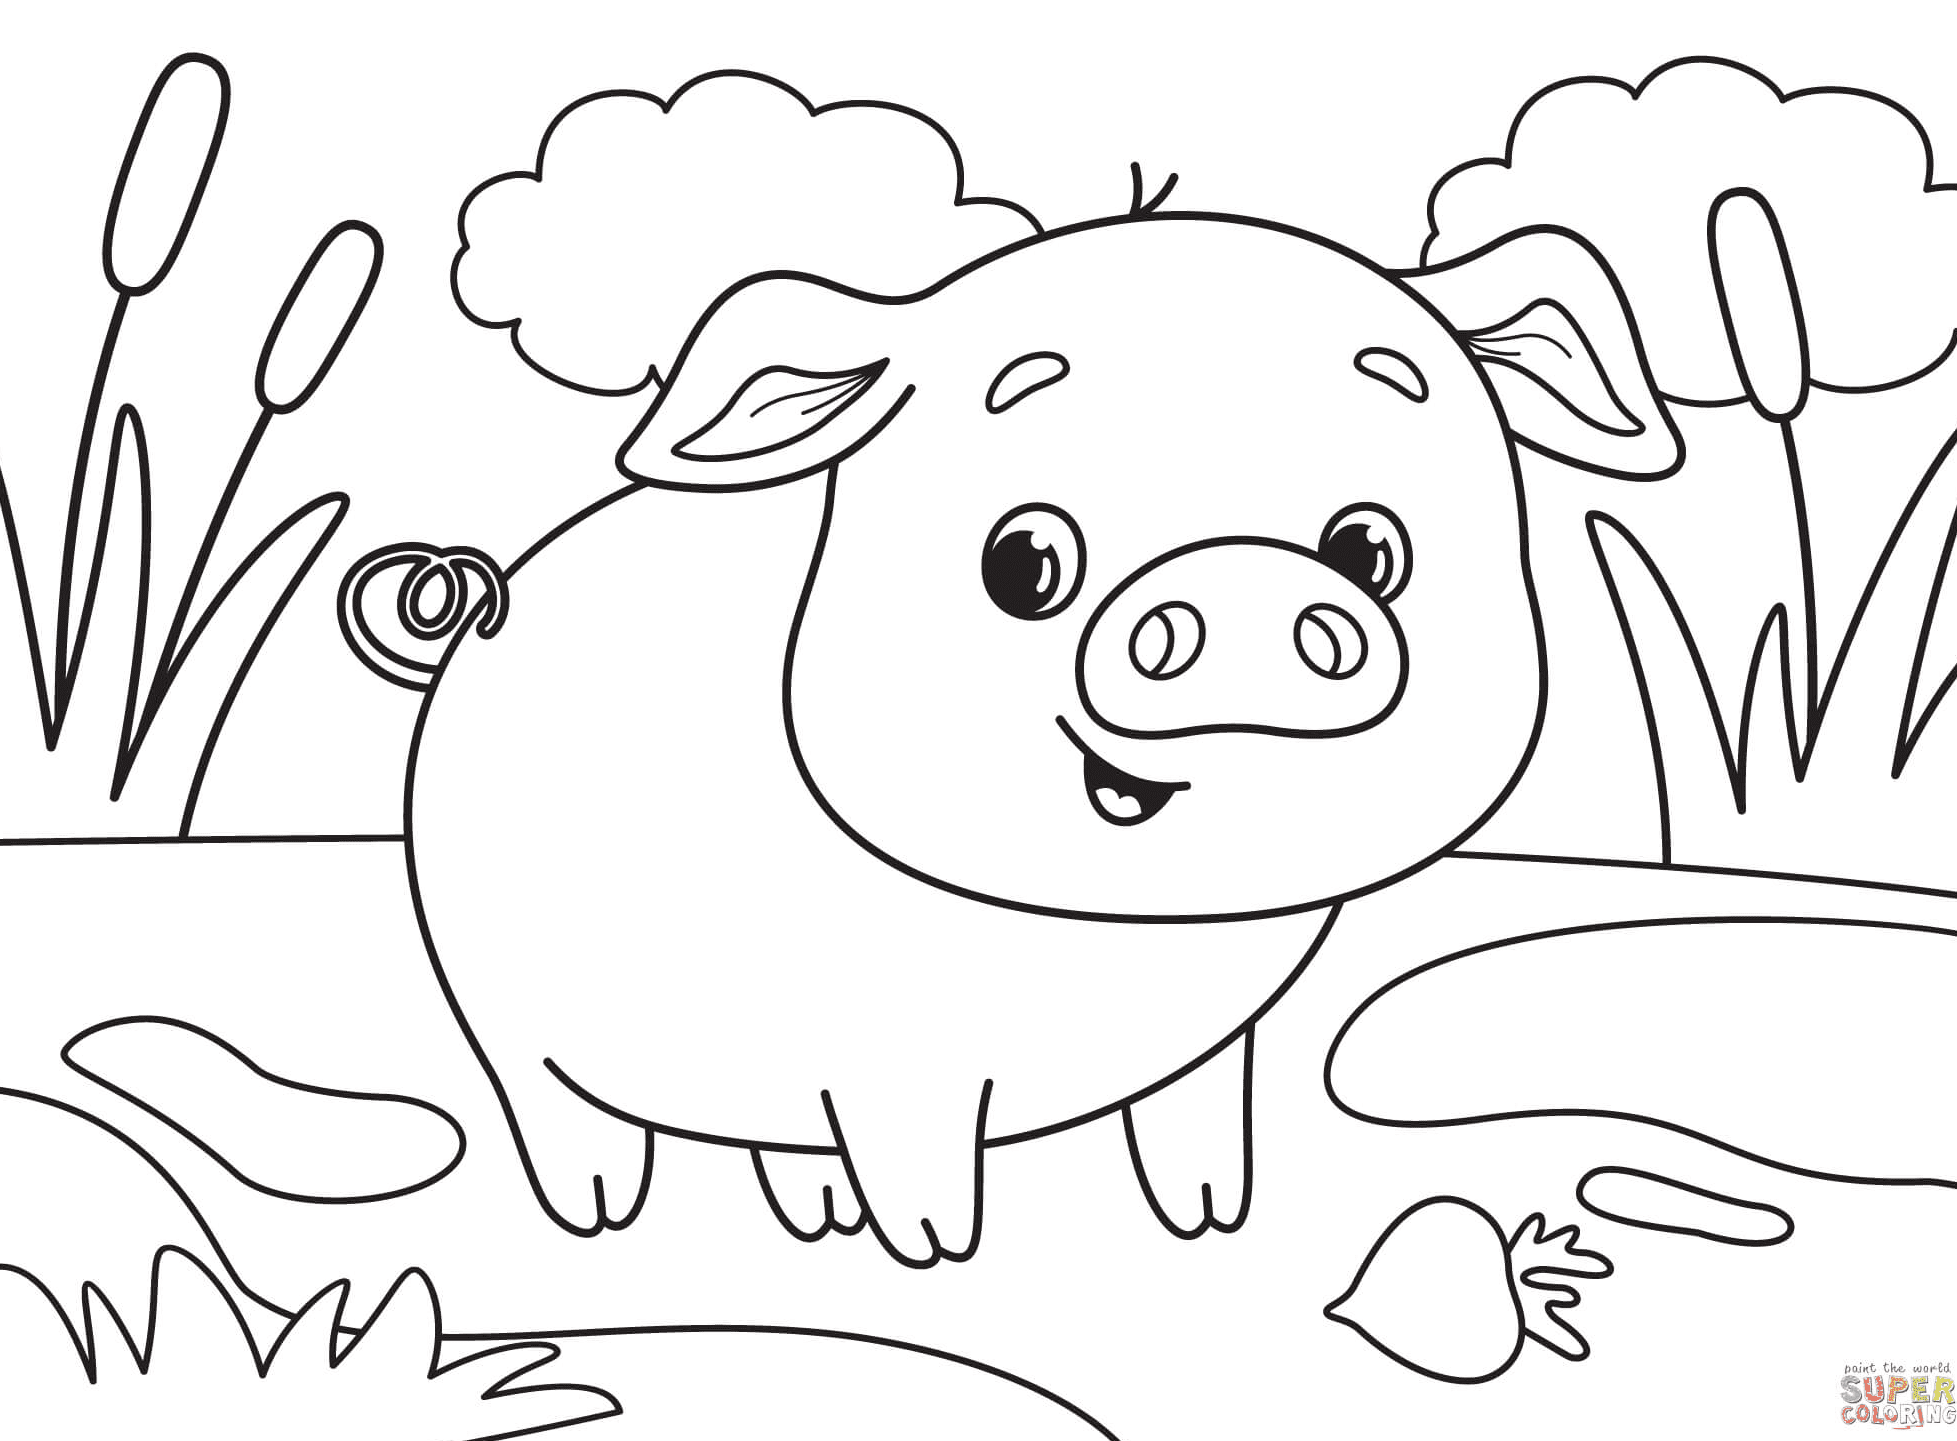 Adorable Pig Coloring Pages